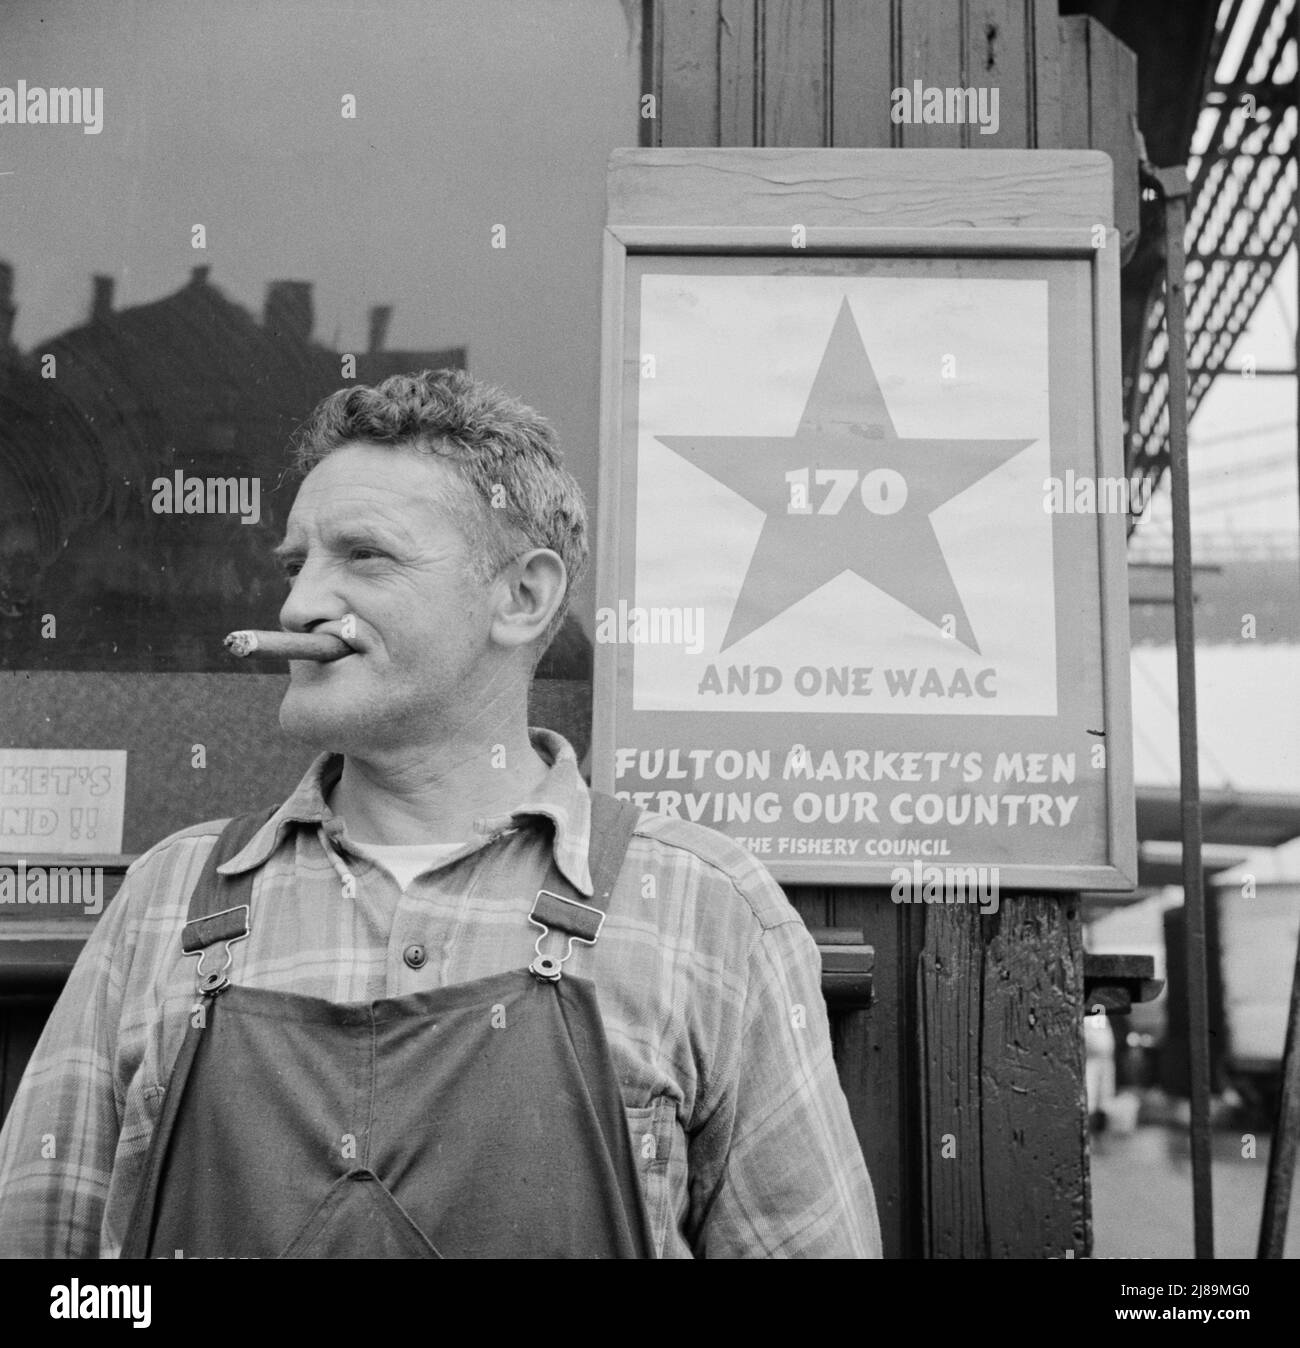 New York, New York. Fulton fish market hooker. [Poster: '170 and one WAAC (Women's Army Auxiliary Corps) Fulton Market's Men Serving Our Country']. Stock Photo